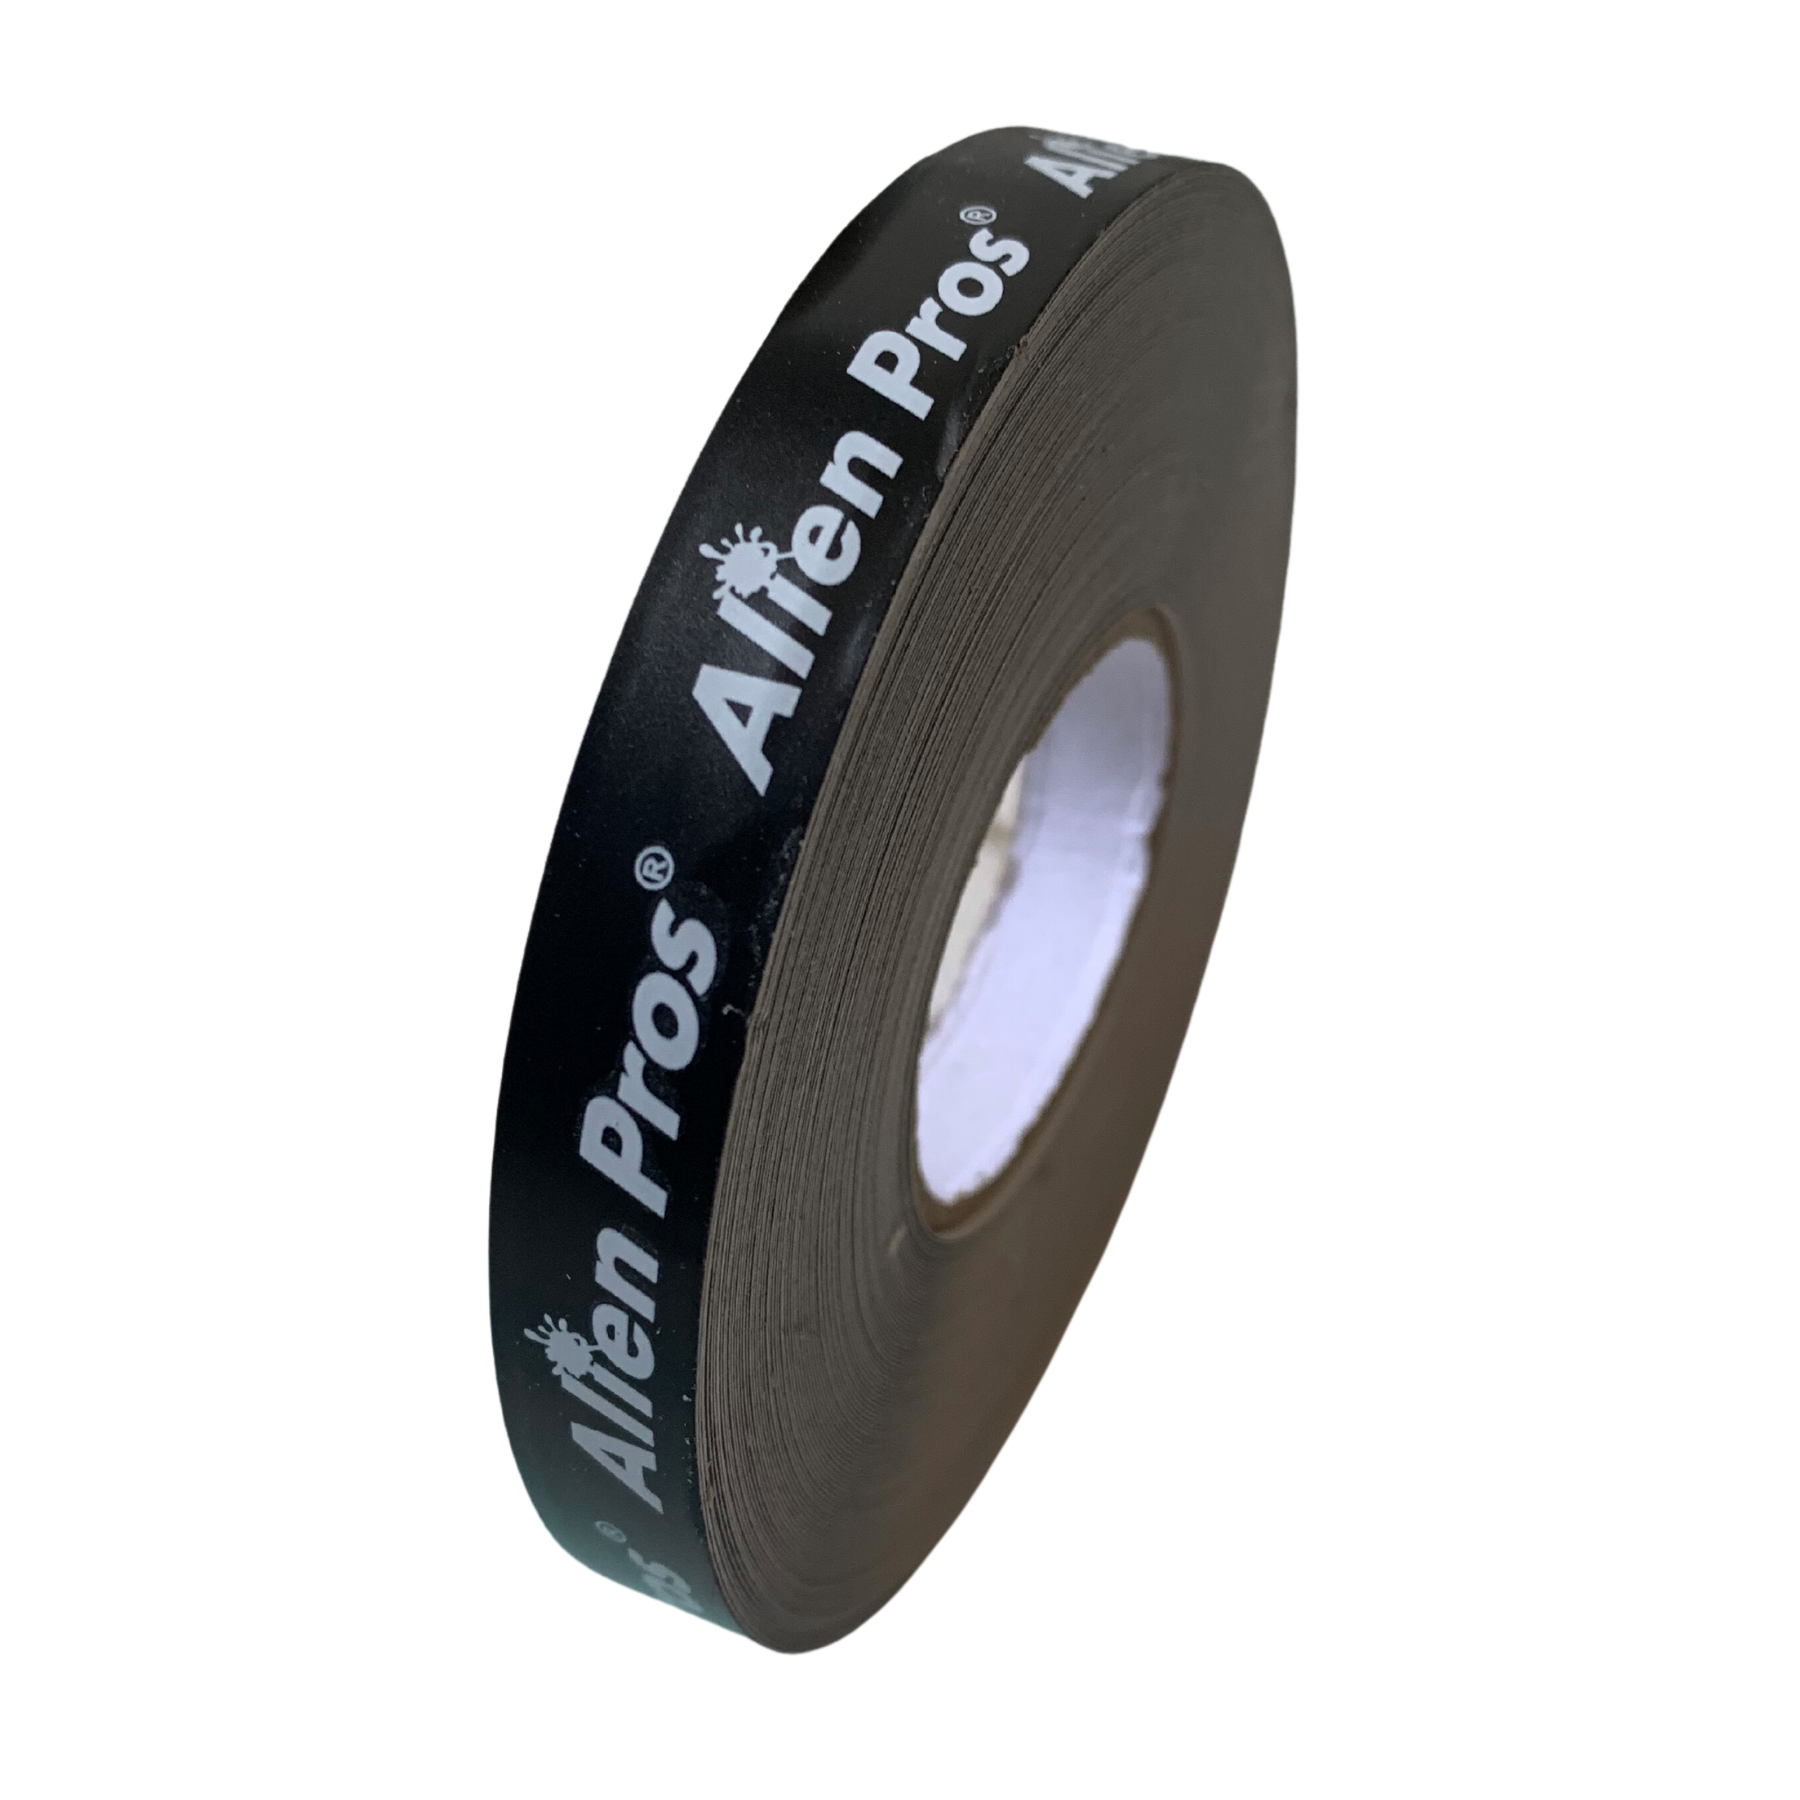 [US] Alien Pros Finishing Tapes Stickers 100 counts/roll